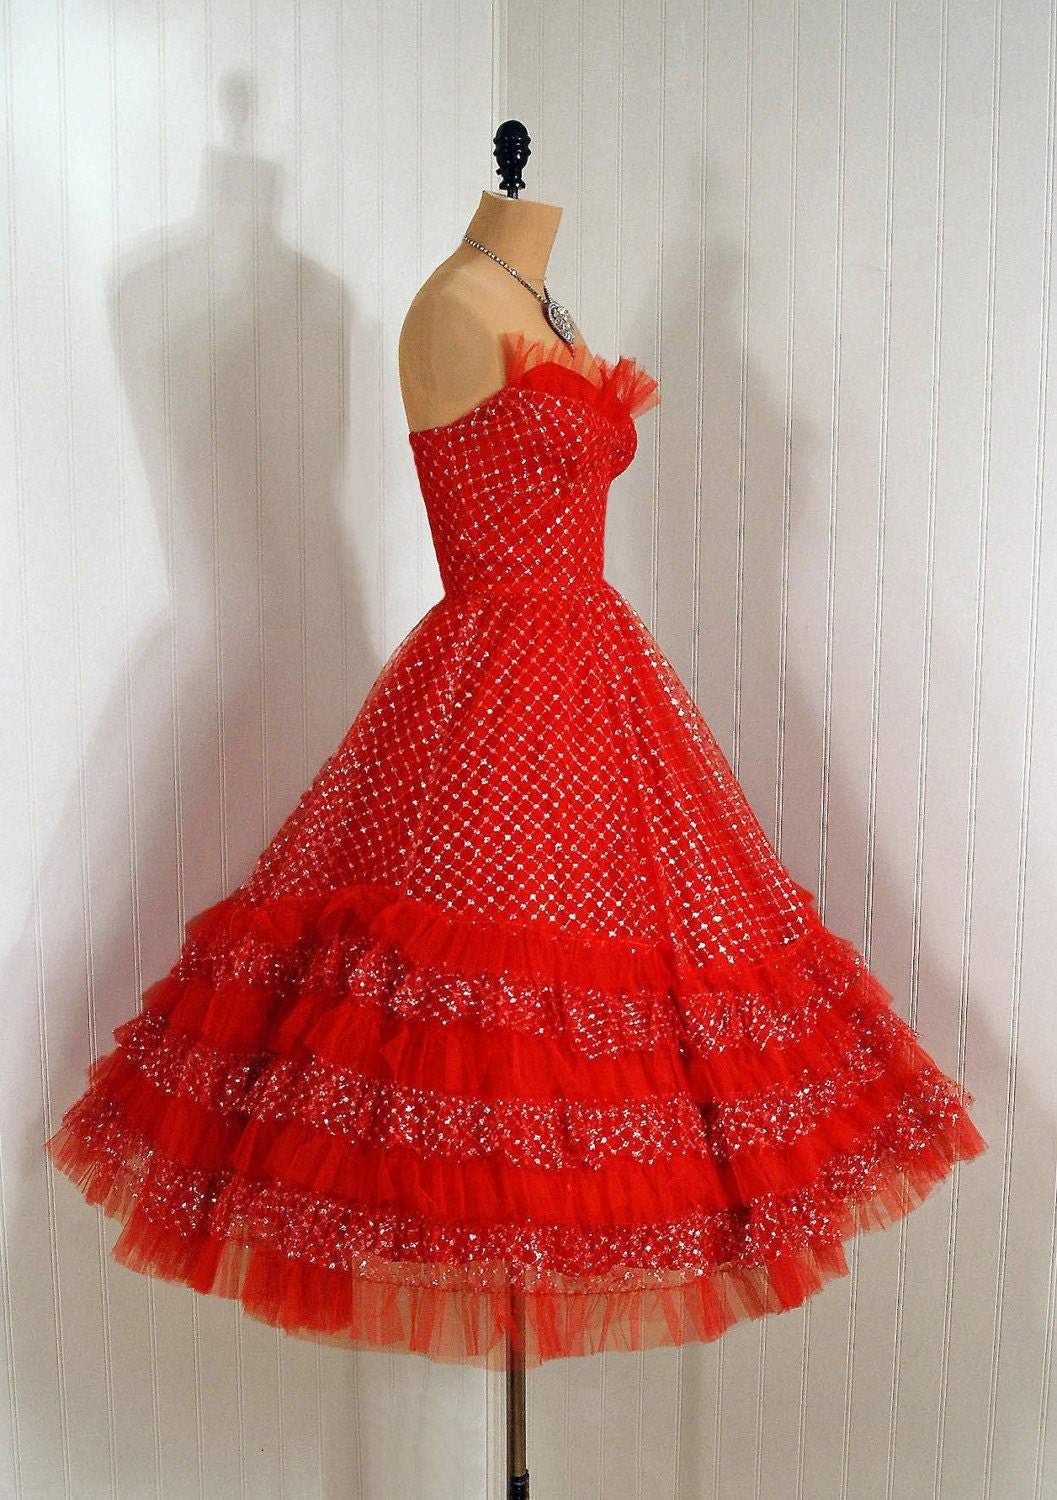 1950's Vintage Ruby-Red Tulle and Metallic-Silver Shimmer Lace-Couture Strapless Sweetheart Tiered-Ruffle Rockabilly Princess Circle-Skirt Wedding Party Prom Cocktail Dress